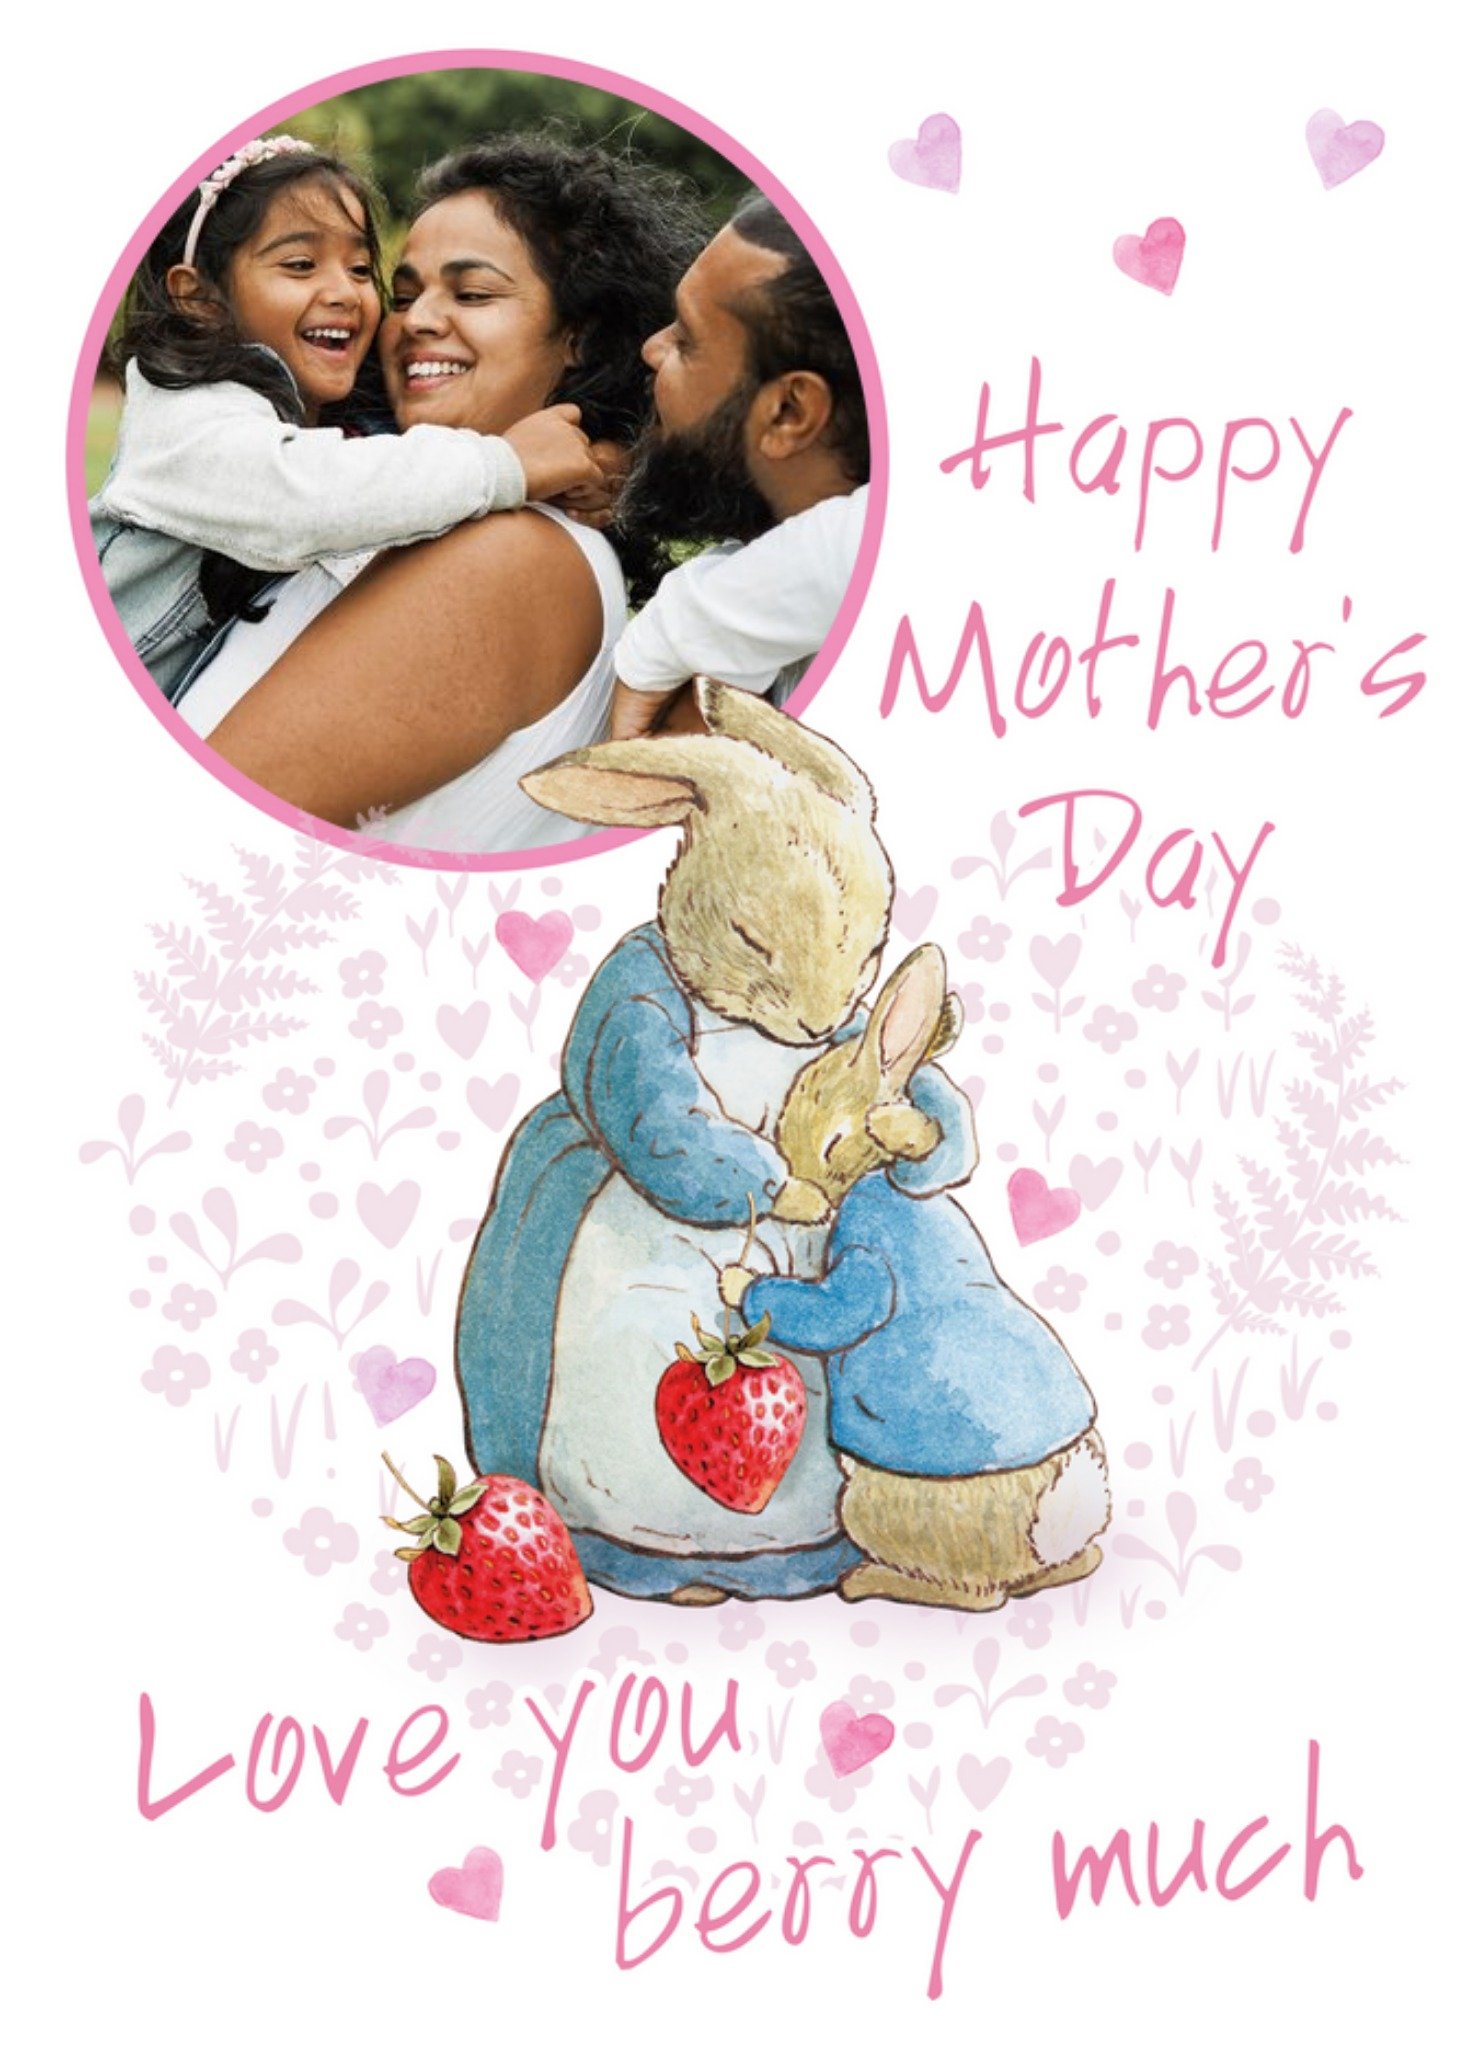 Beatrix Potter Peter Rabbit Happy Mothers Day Love You Berry Much Photo Upload Card Ecard